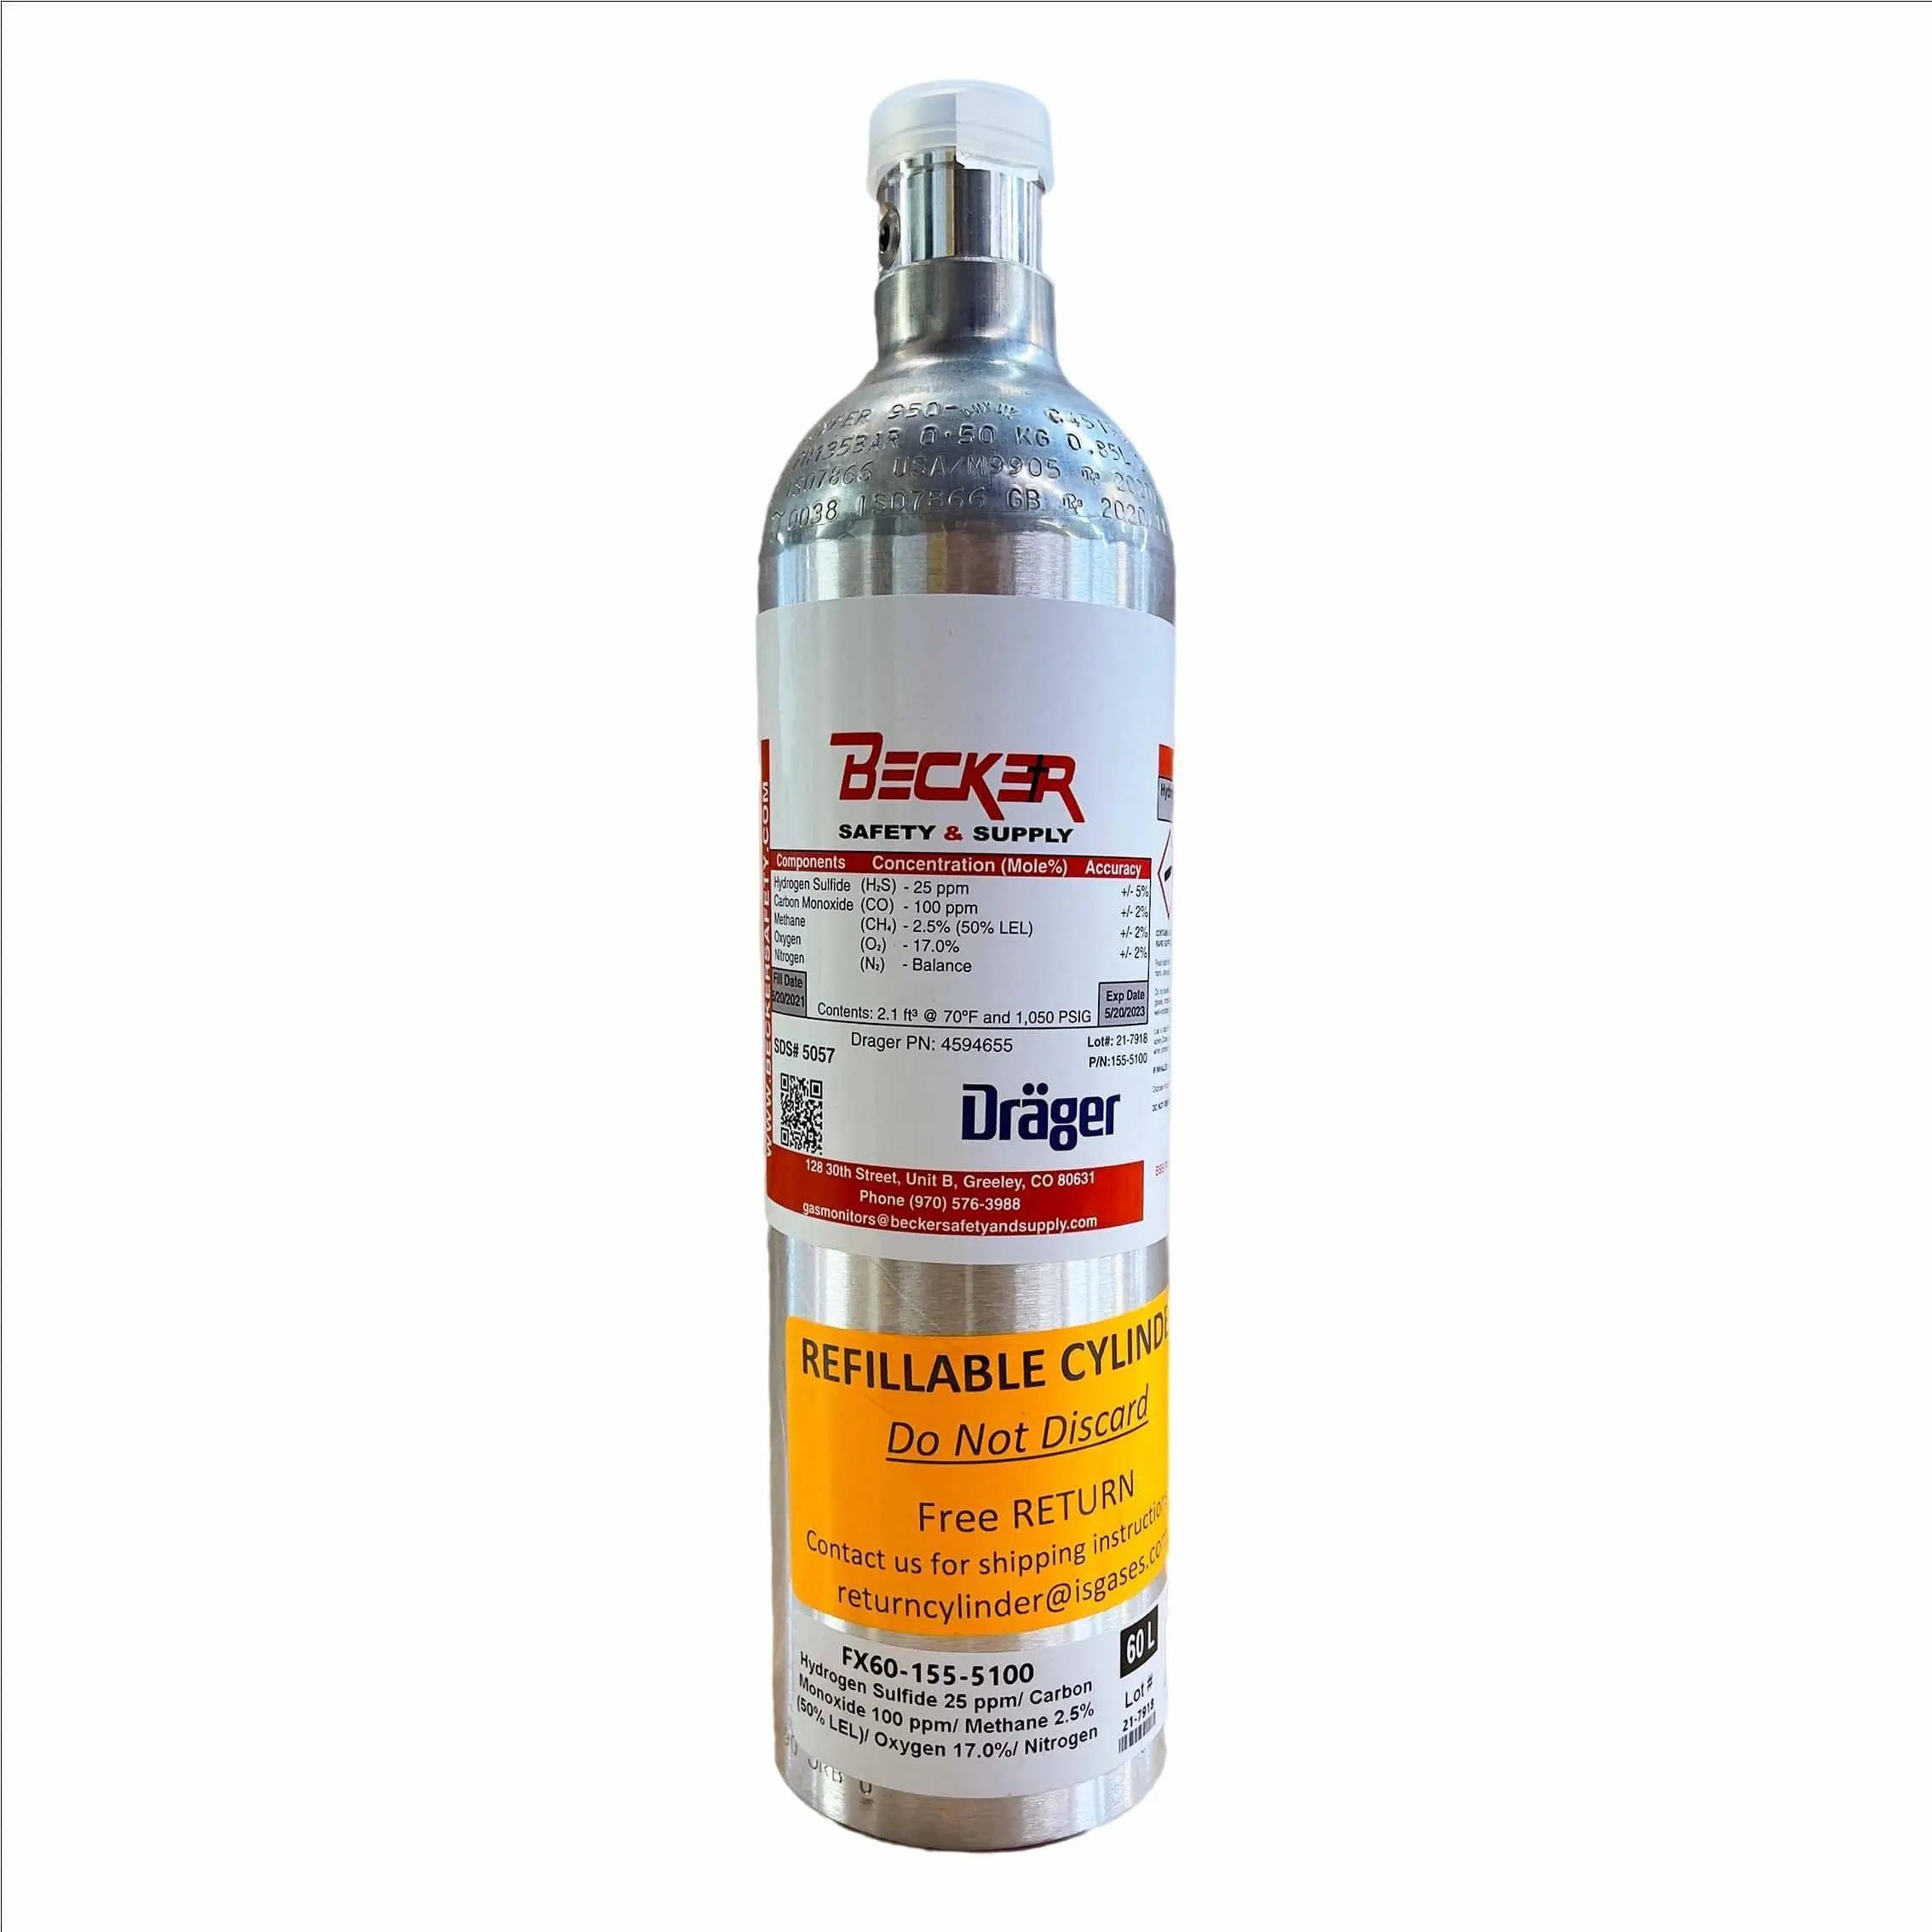 DRAEGER - Calibration Gas 02,CO,H2S, LEL 58L (17% 02, 25PPM H2S, 100 PPM CO, 50% LEL) - Becker Safety and Supply